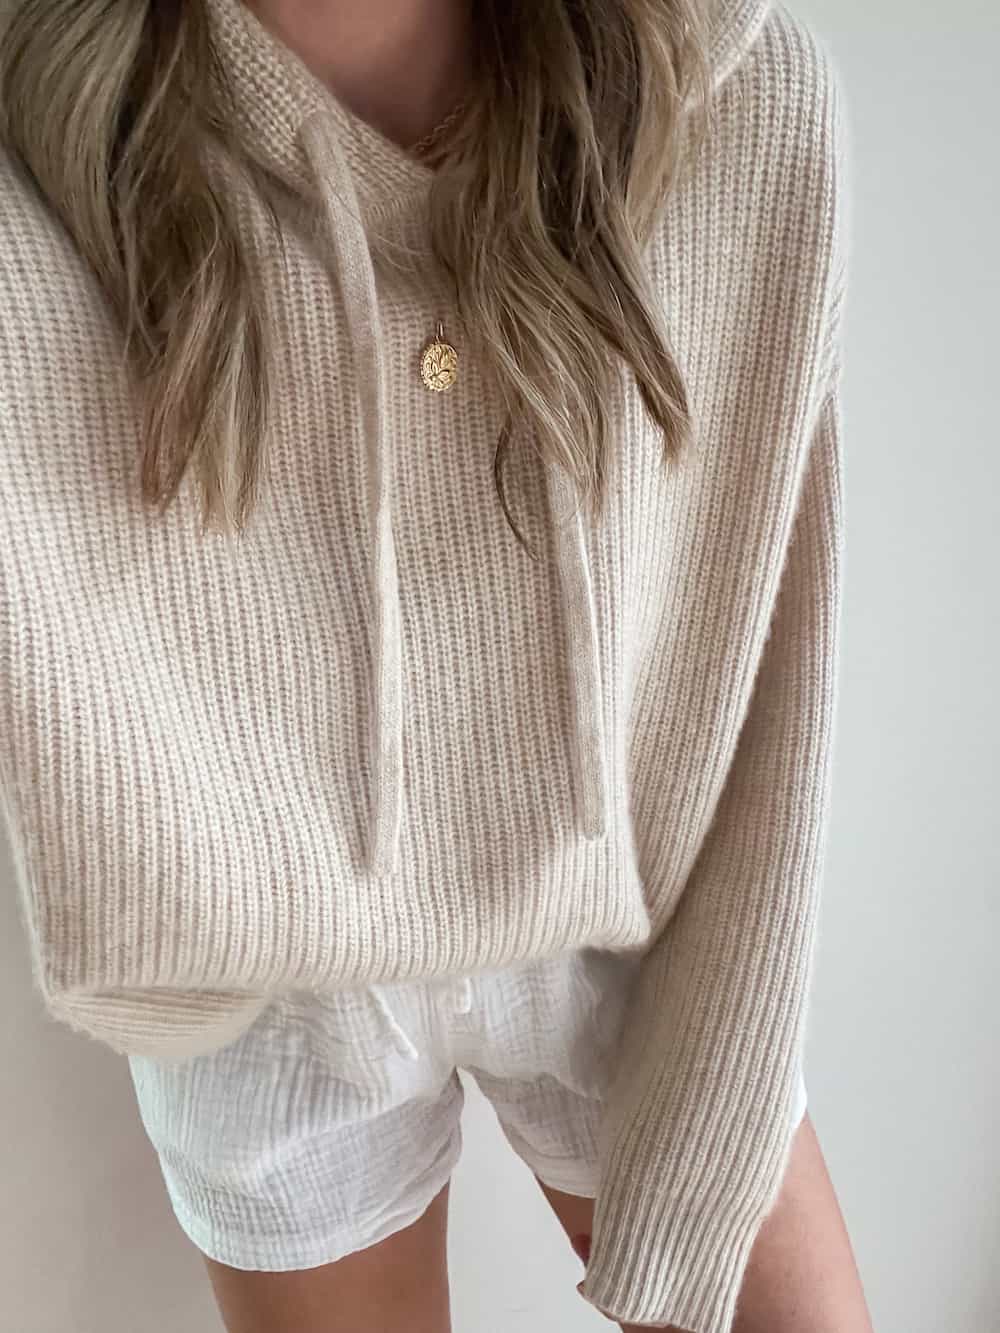 woman wearing a beige cashmere knit hoodie sweater from Jenni Kayne with white crinkle cotton shorts